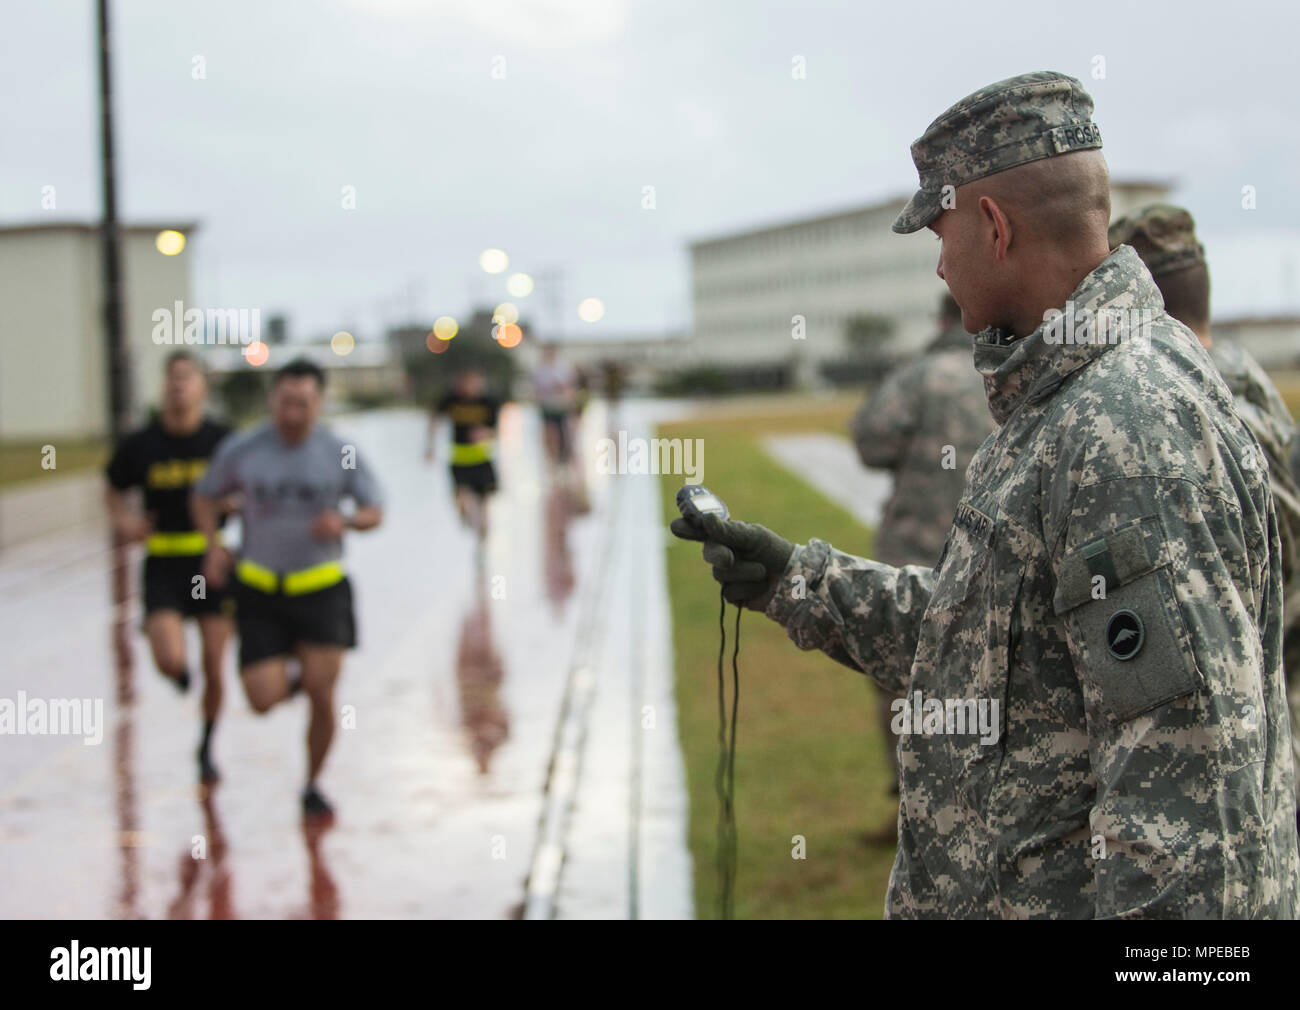 Camp Hansen, Okinawa (Feb 08, 2017) – Sgt. Maj. Juan Rosario-Montalvo monitors Soldiers and Airmens times as part of a graded fitness test during the US Army Japans best warrior competition. The top competitors of this competition will continue on to compete in a pacific-wide competition in Hawaii. (U.S. Navy photo by Mass Communication Specialist Taylor Mohr) Stock Photo